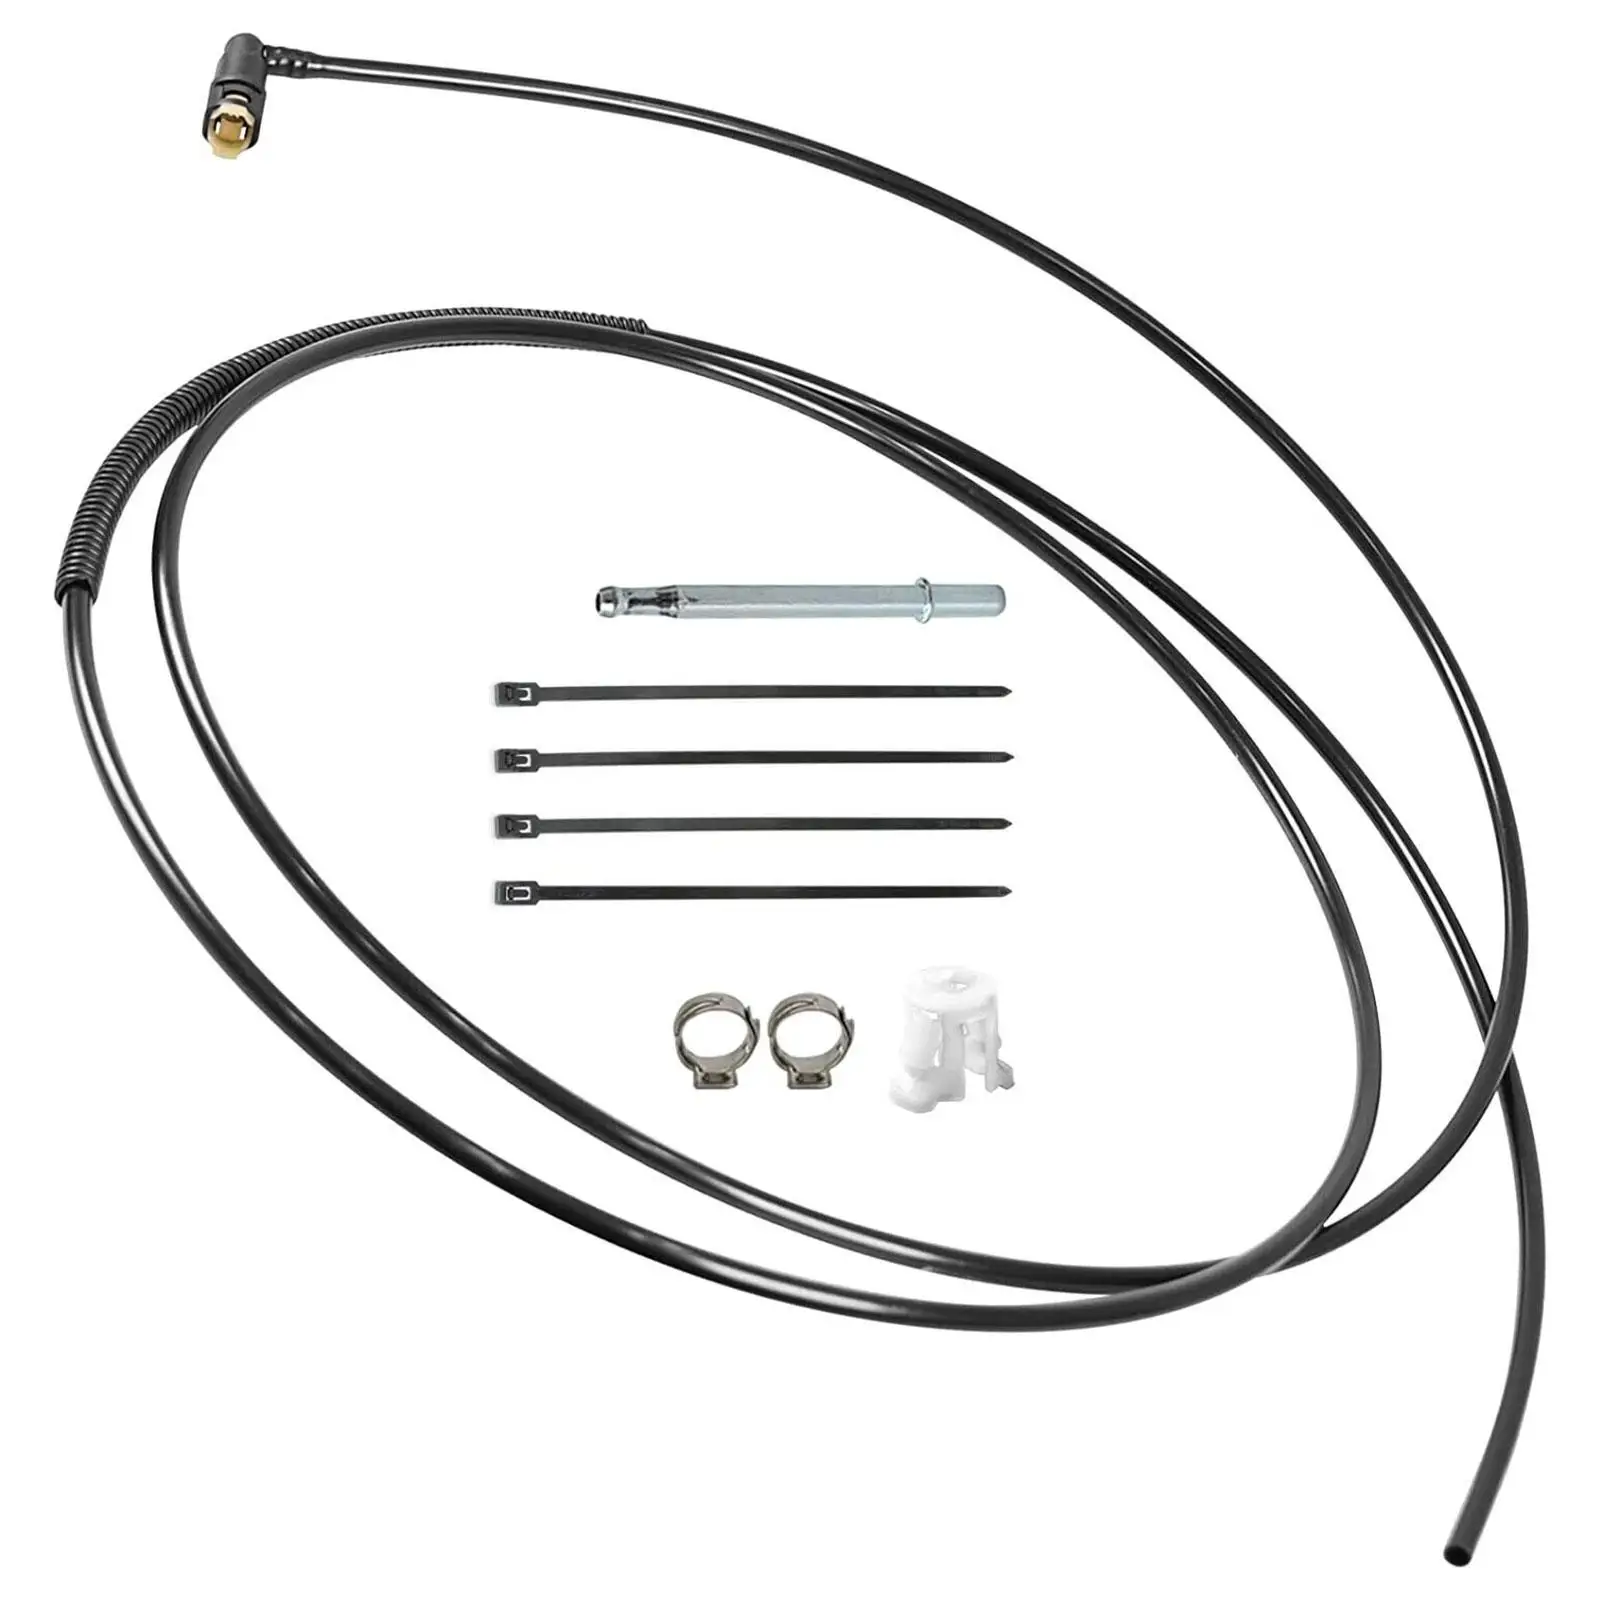 Gas Fuel Line Fl-Fg0212 High Performance Car Accessories Replaces Durable